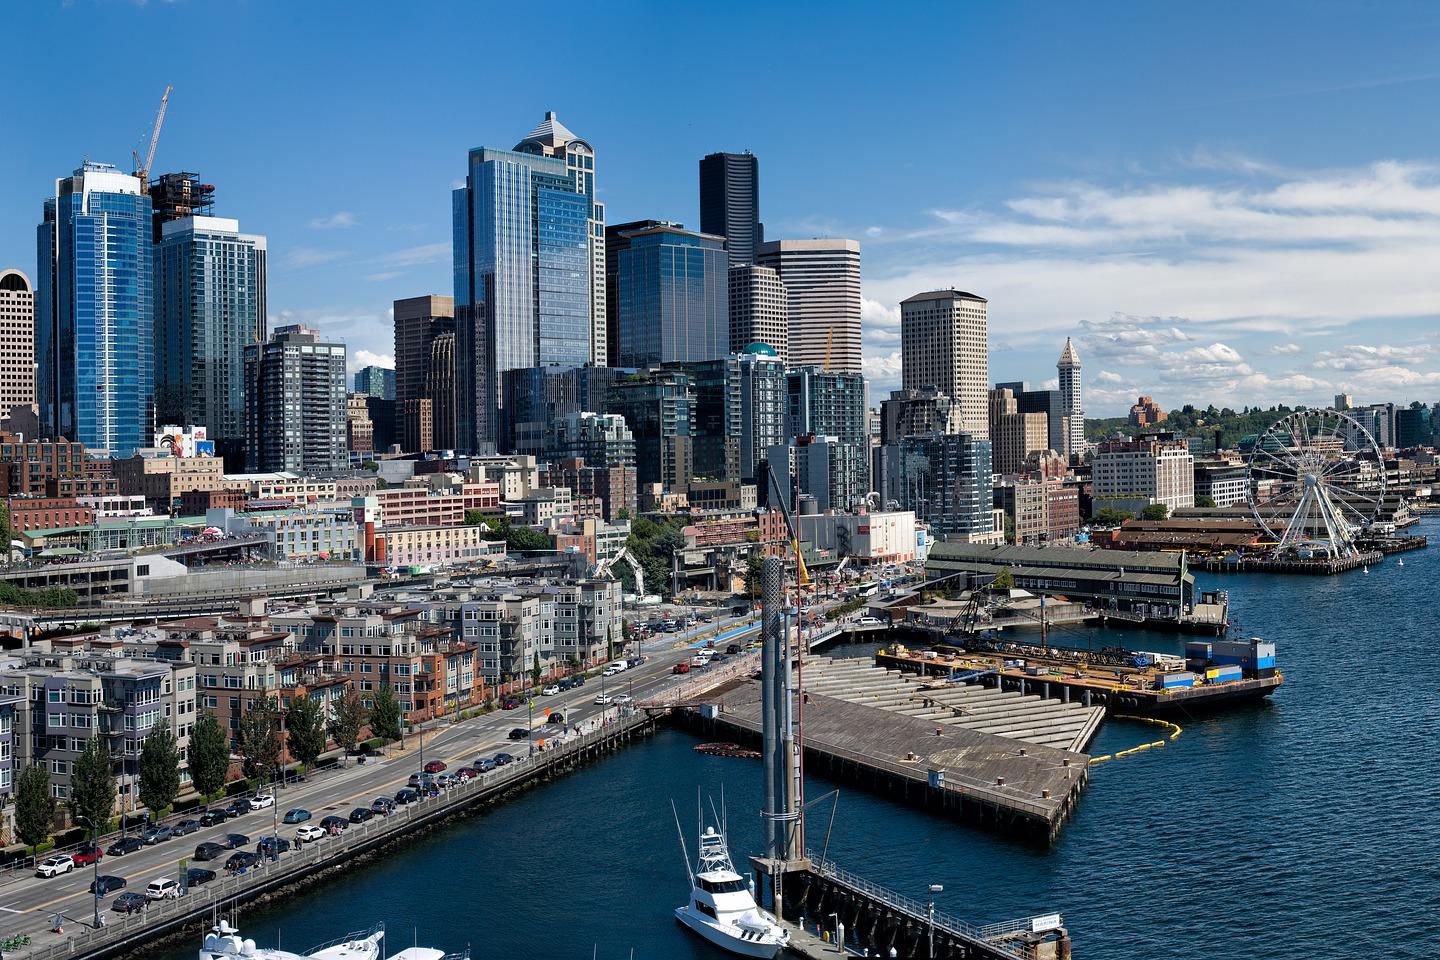 Stay with us pre or post-cruise from the Port of Seattle